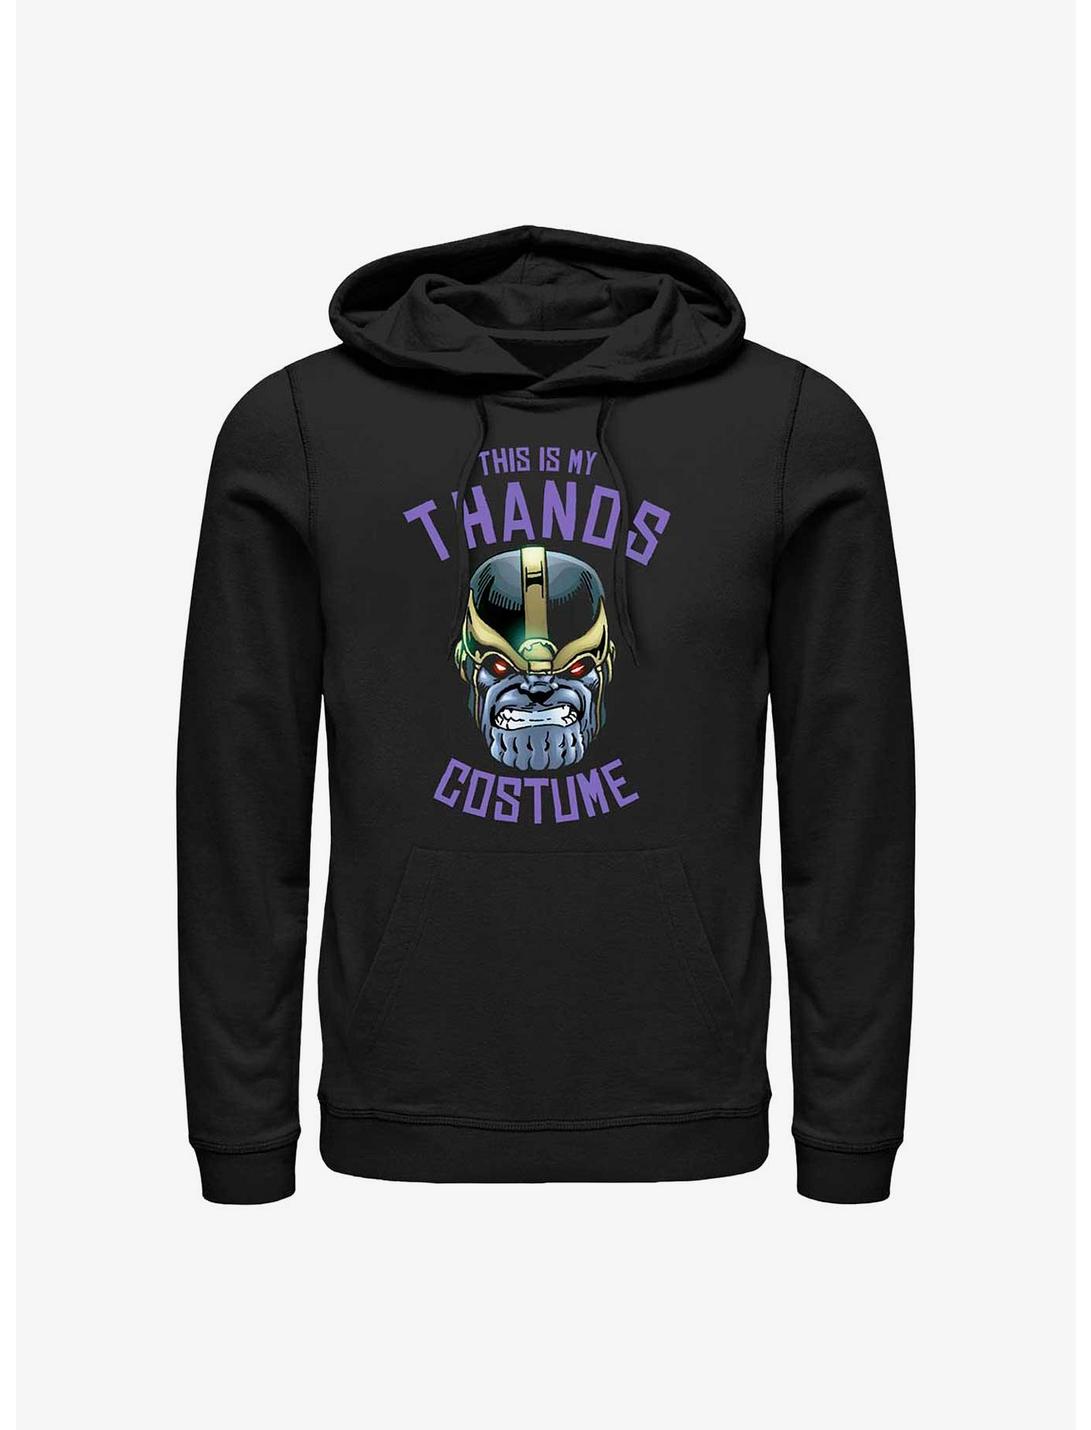 Marvel Avengers This Is My Thanos Costume Hoodie, BLACK, hi-res